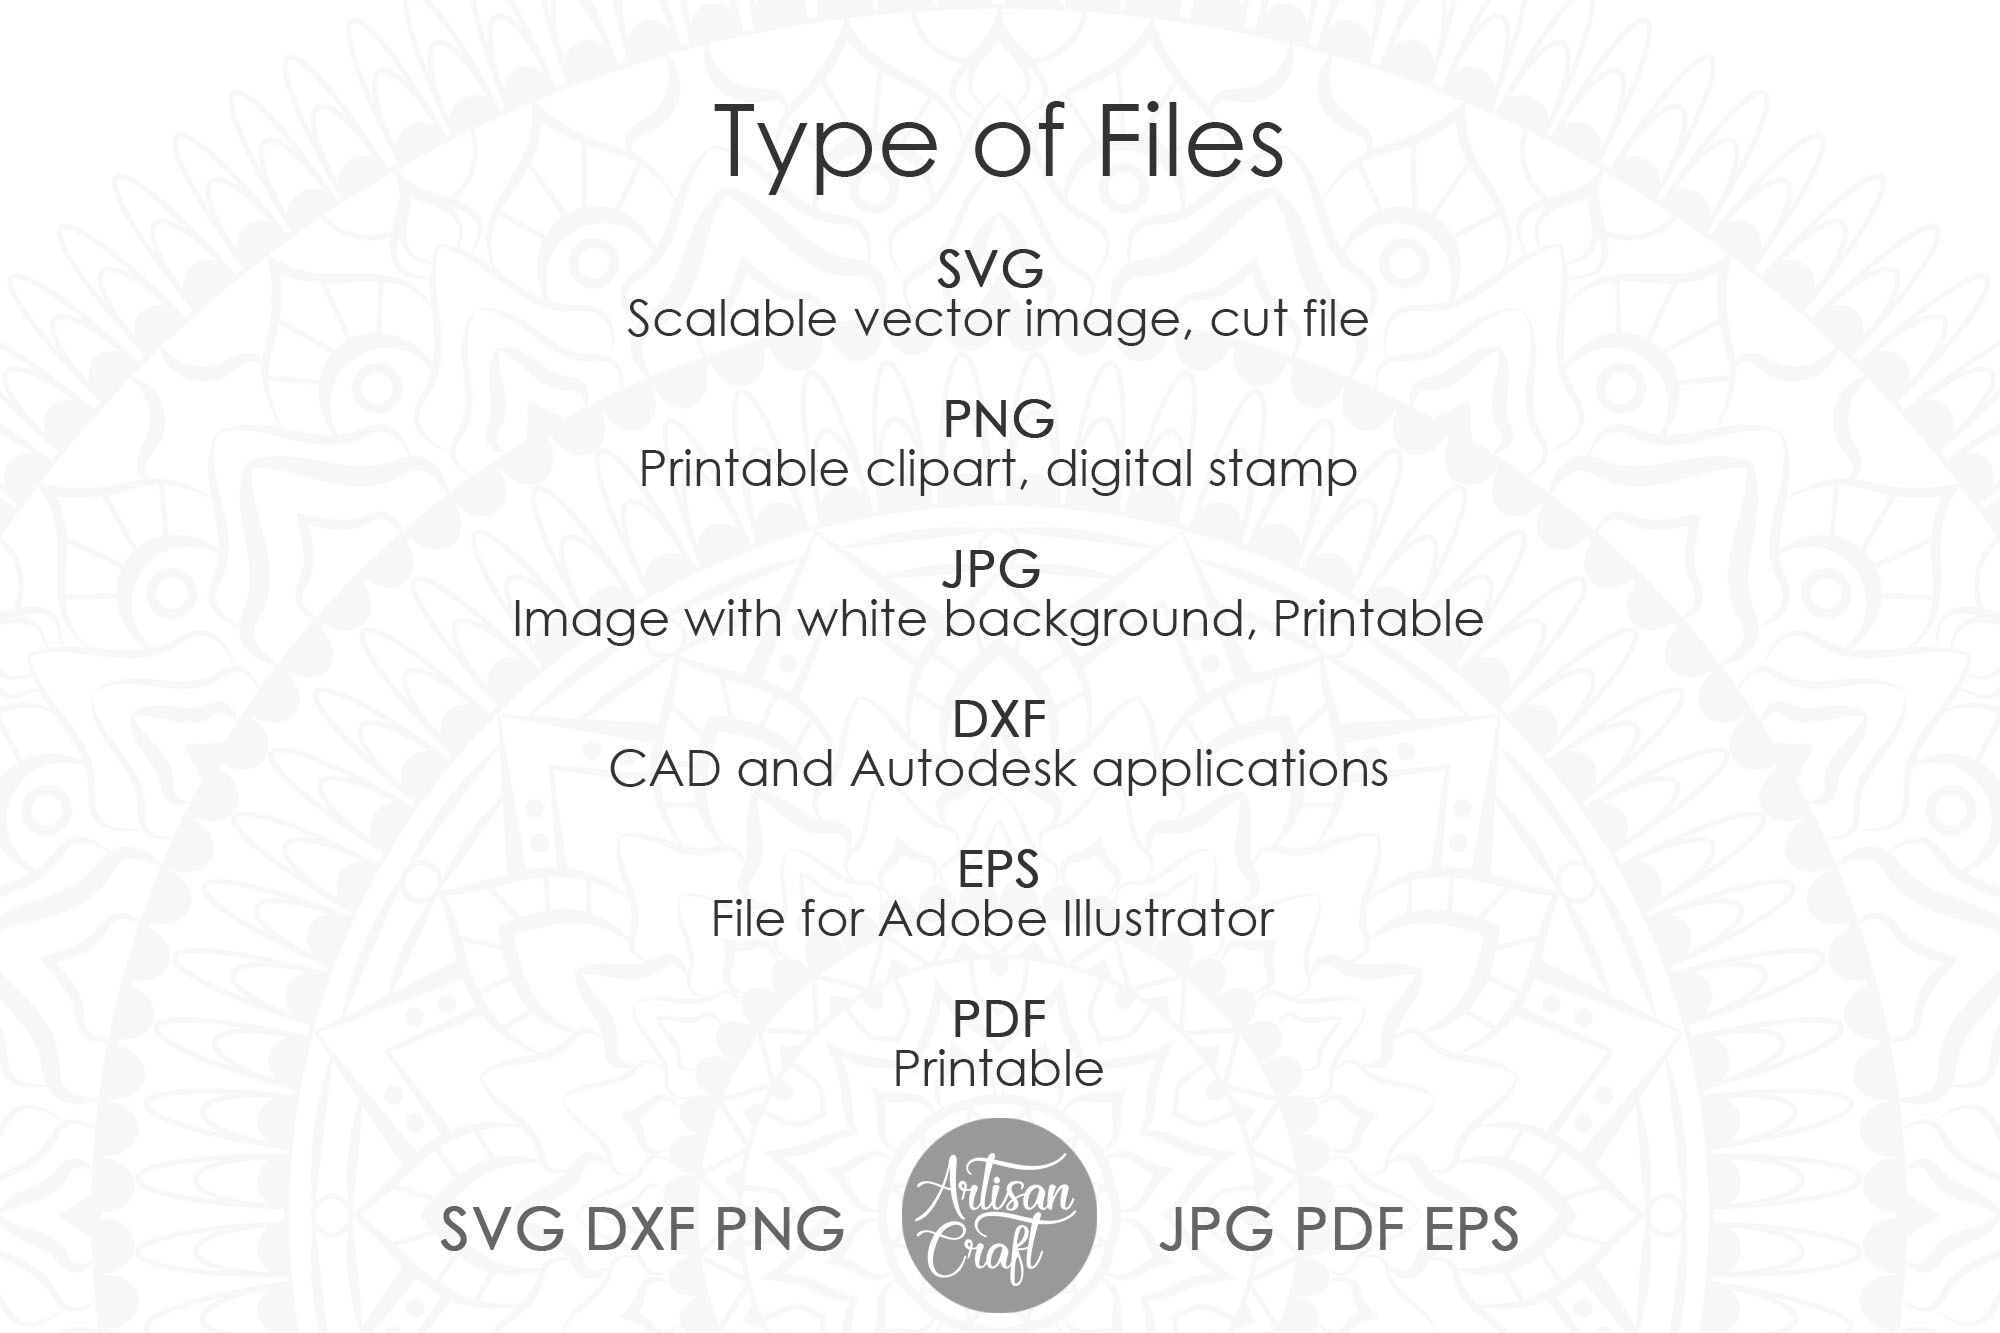 Free Free 249 Mermaid Scale Heart Svg SVG PNG EPS DXF File